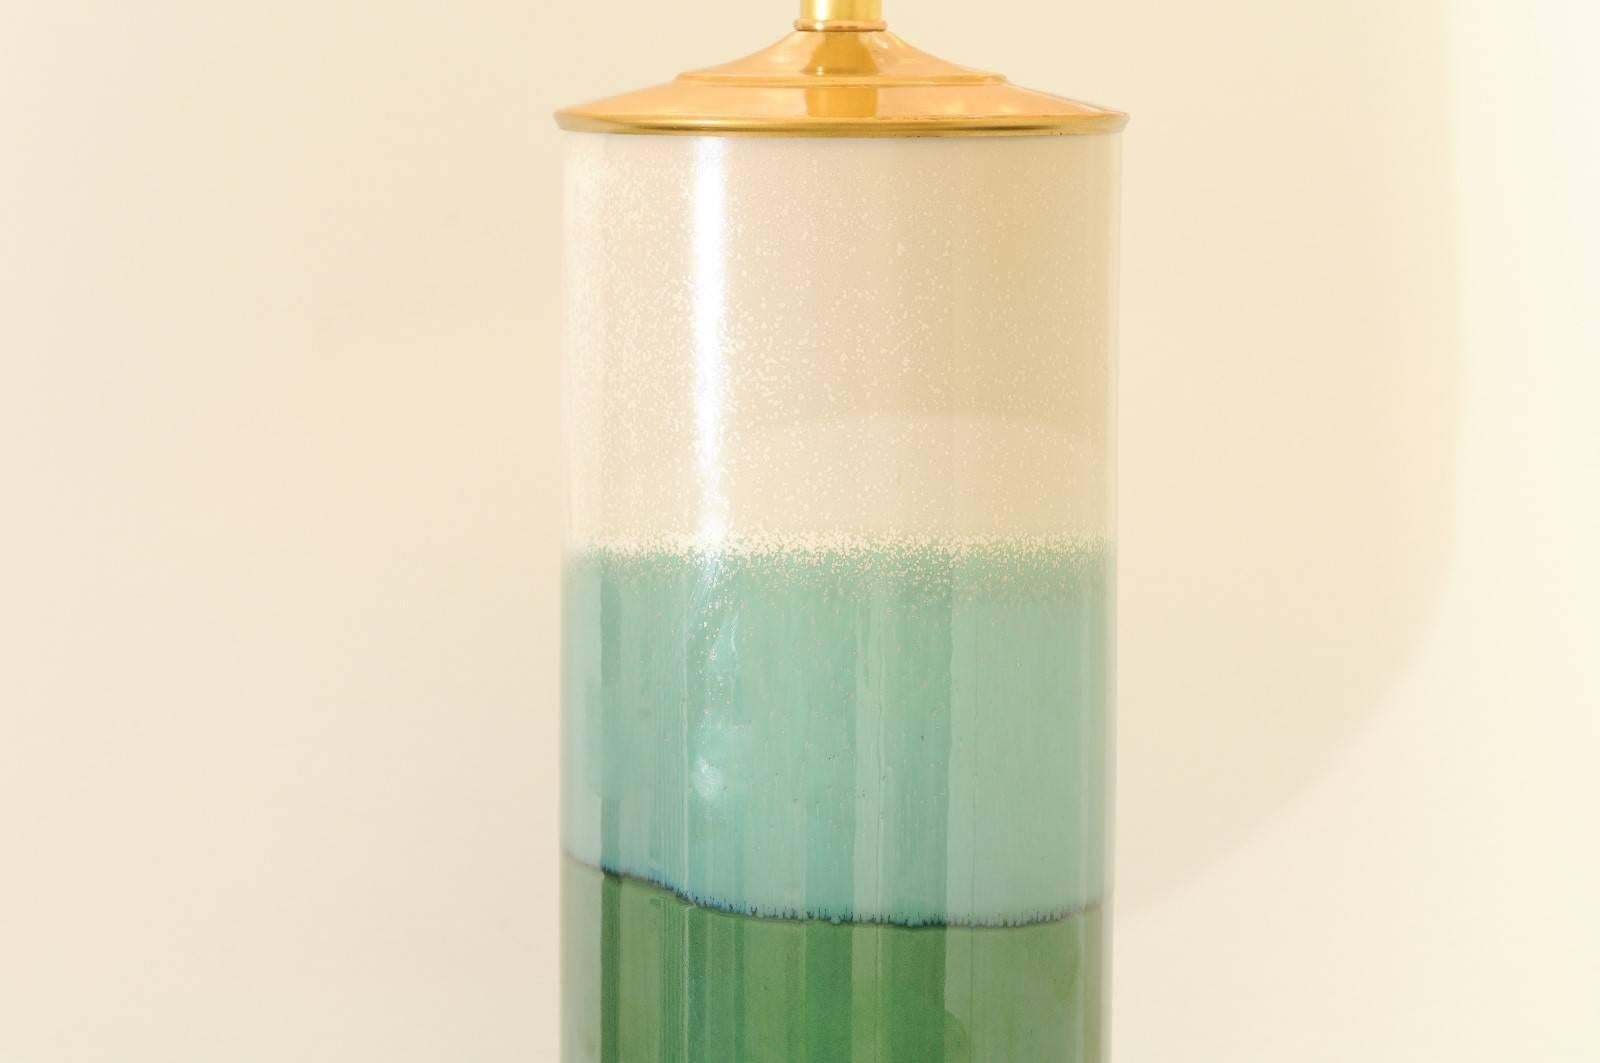 Late 20th Century Exquisite Pair of Drip-Glaze Lamps with Accents of Lucite, Brass and Jade